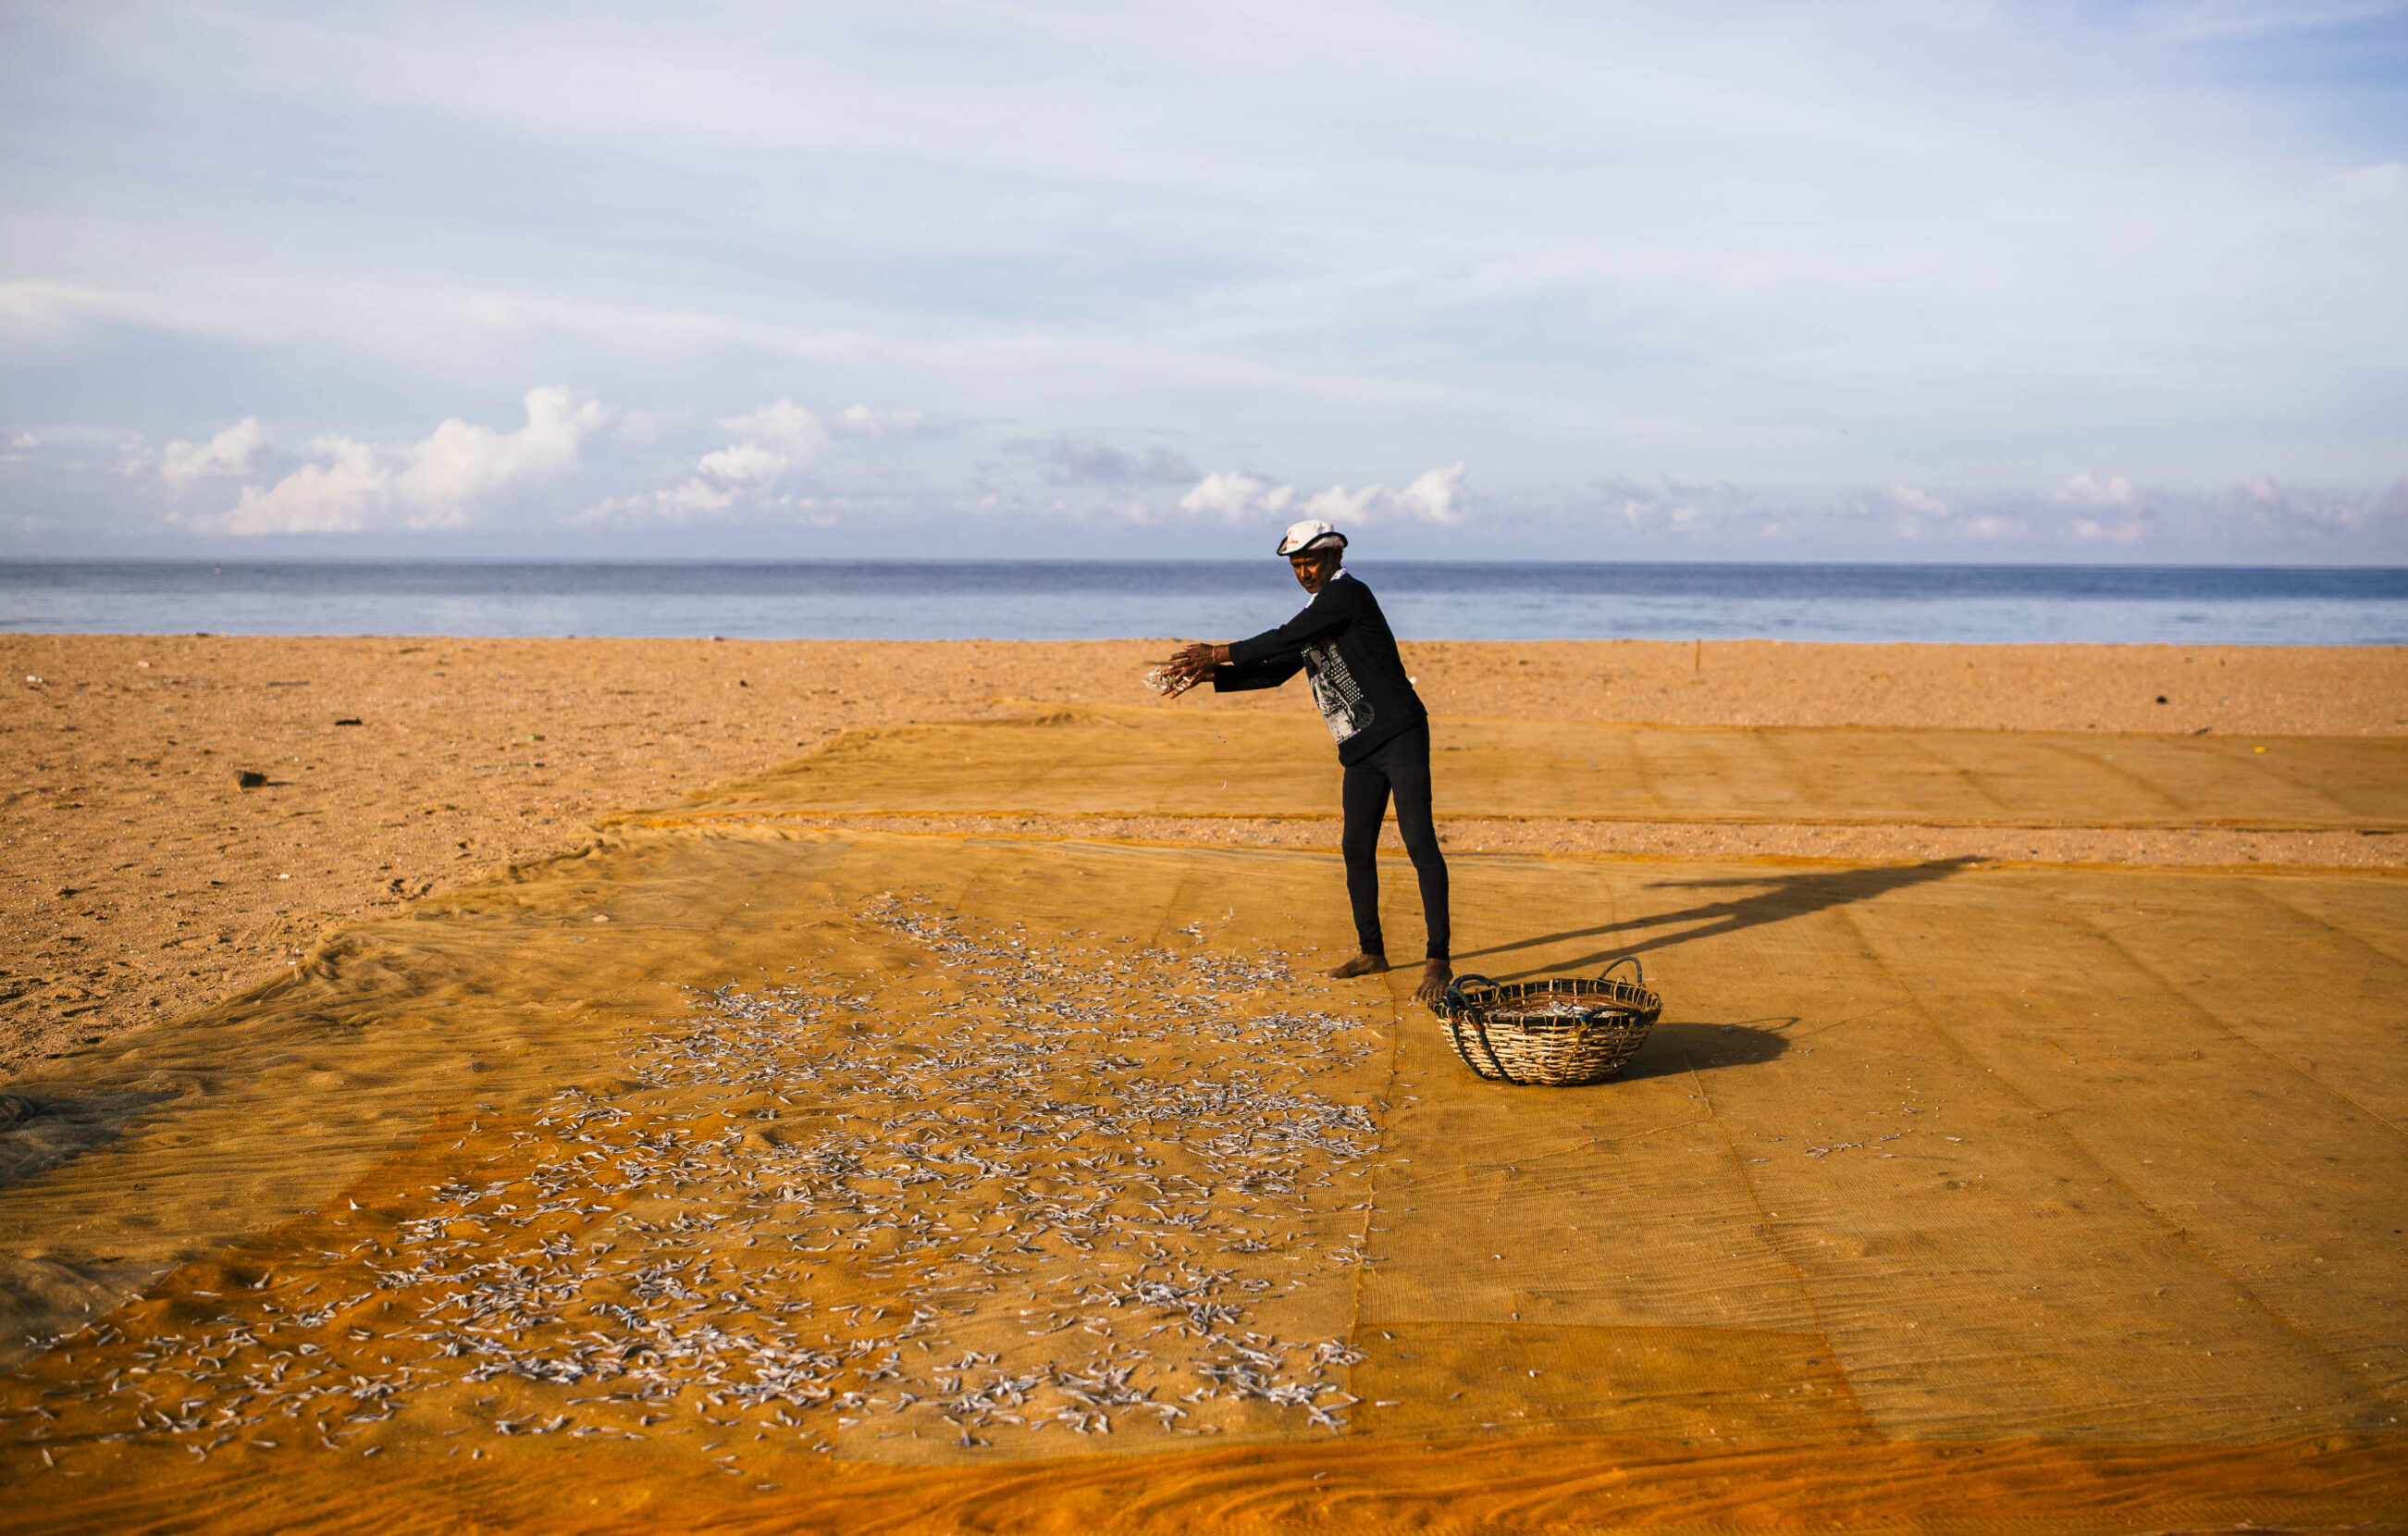 A man stands on a beach, casting handfuls of fish onto nets laid out on the sand.